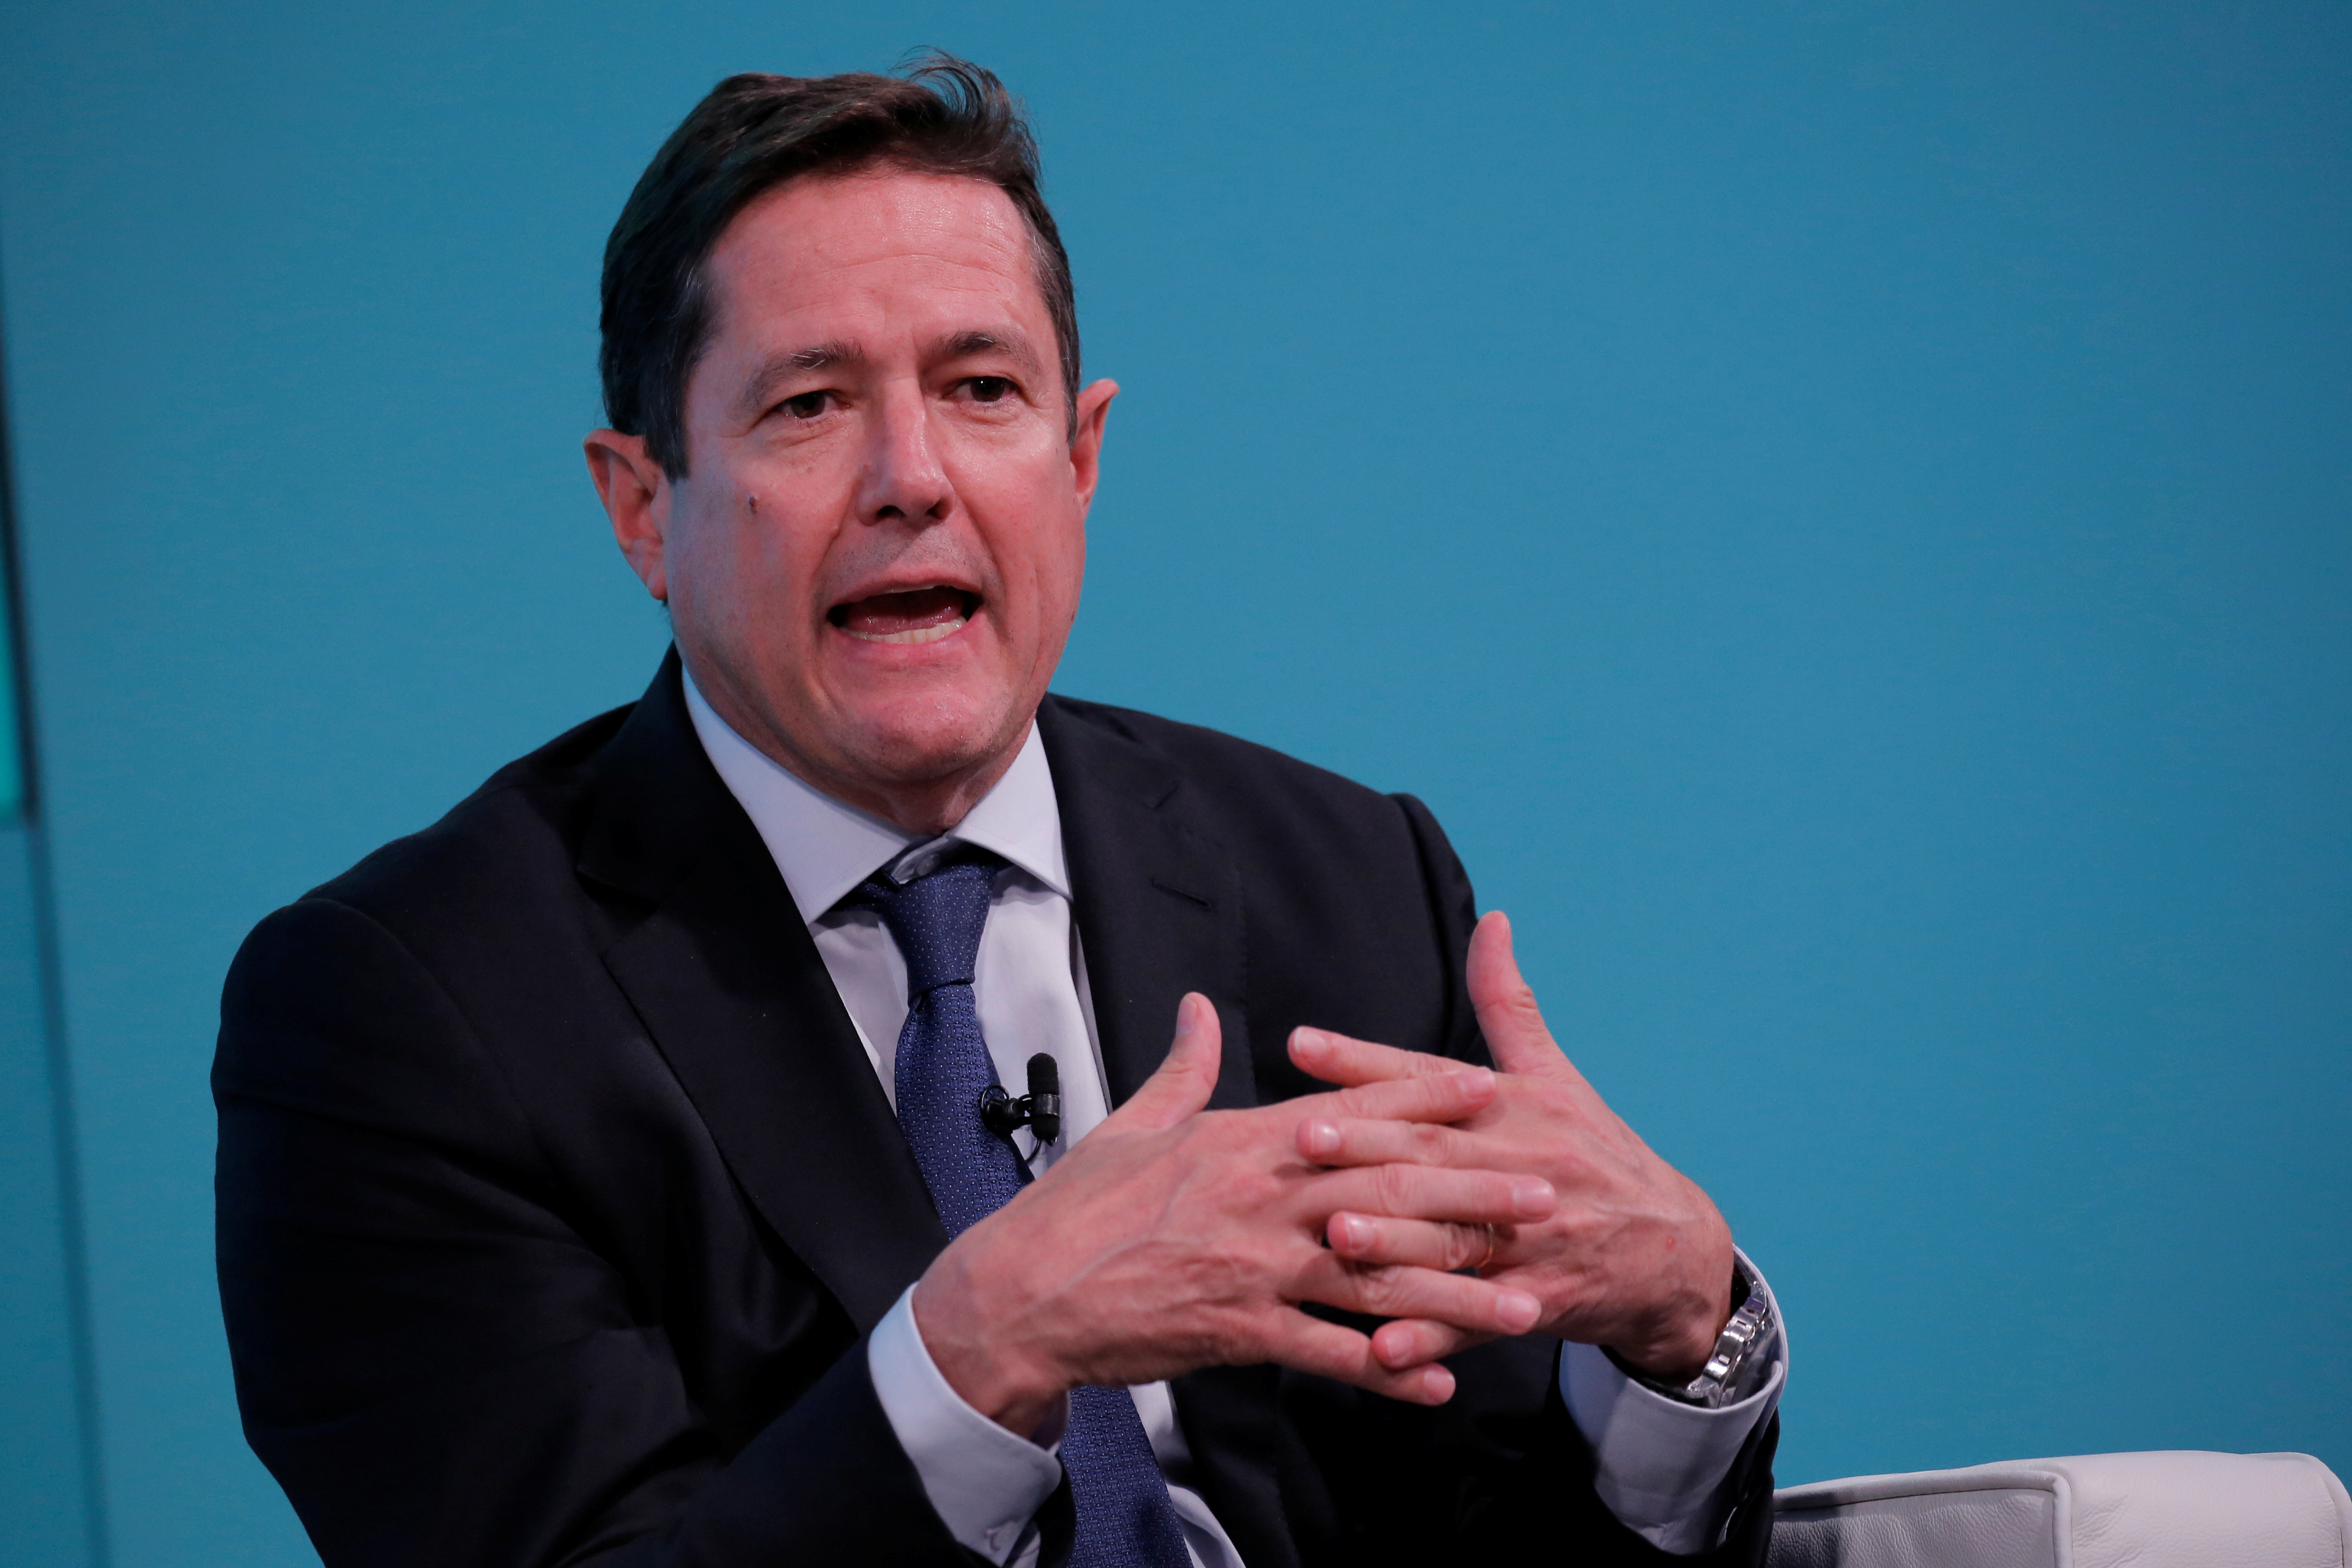 Chief executive officer of Barclays, Jes Staley, takes part in the Yahoo Finance All Markets Summit in New York